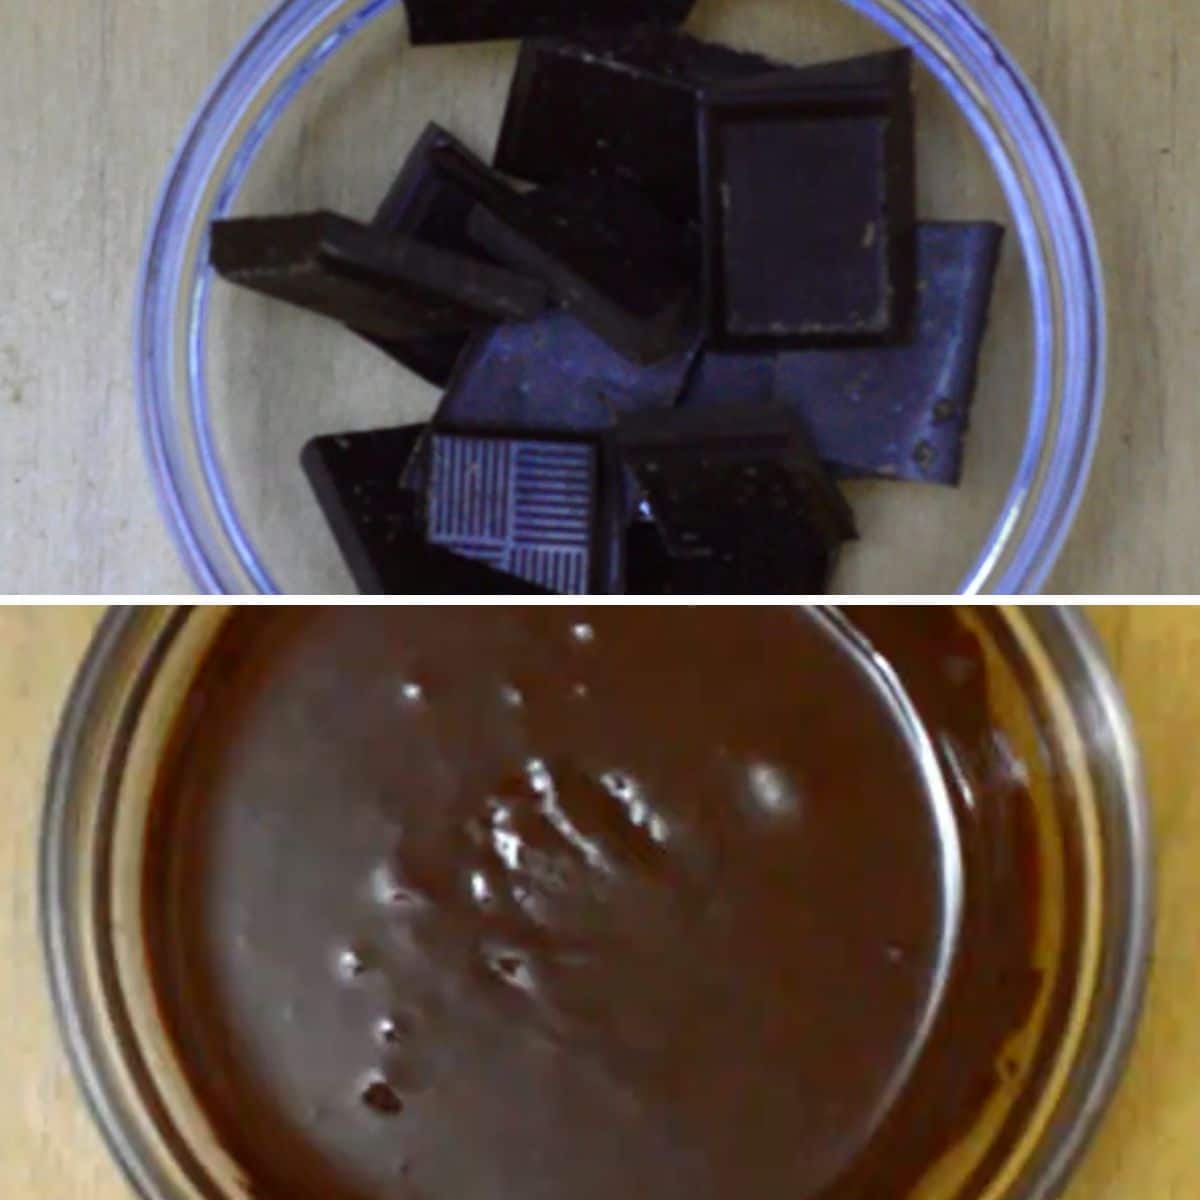 college of 2 images with top image of broken chocolate in a bowl and bottom image of melted chocolate in a bowl.